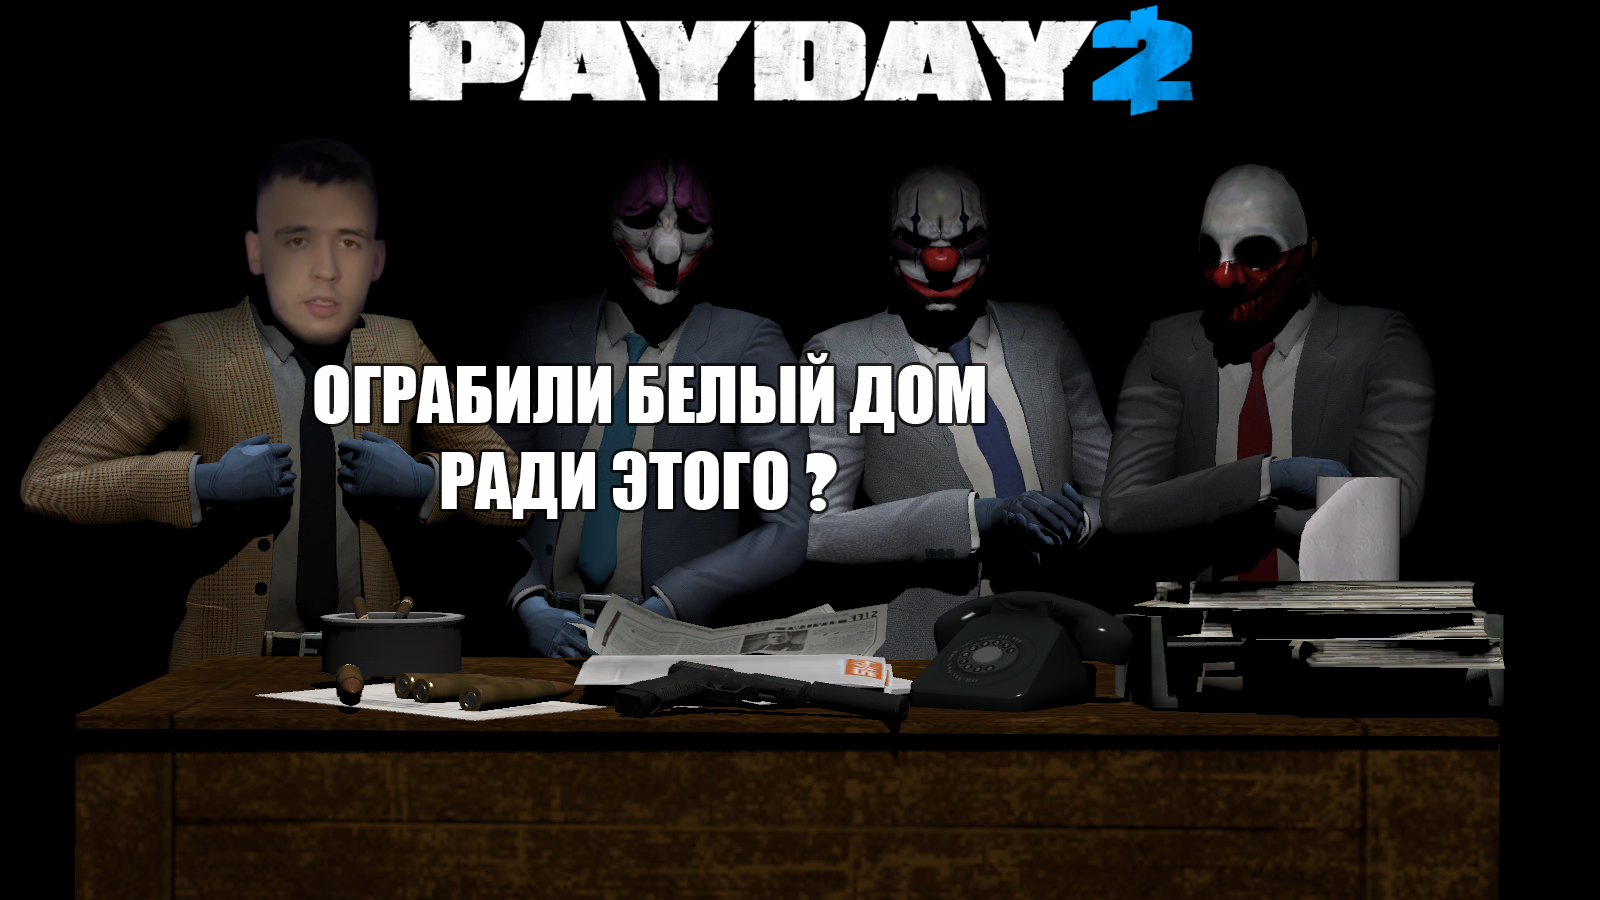 Drag in drop inventory payday 2 фото 46